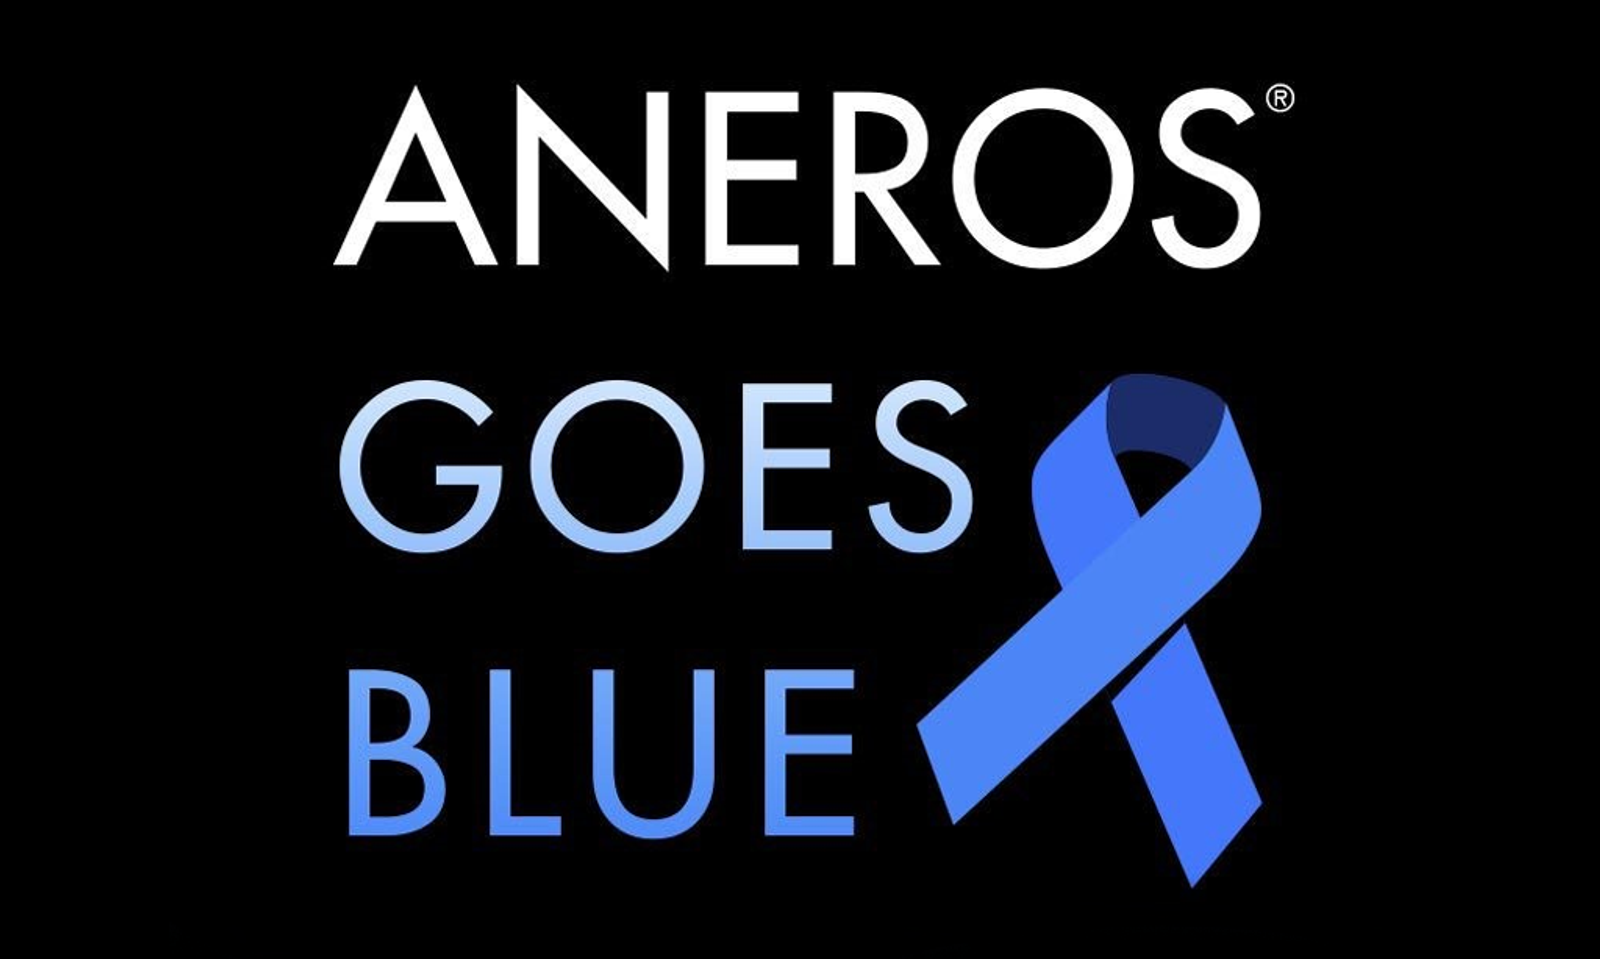 Aneros Hosting Contests for Prostate Cancer Awareness Month